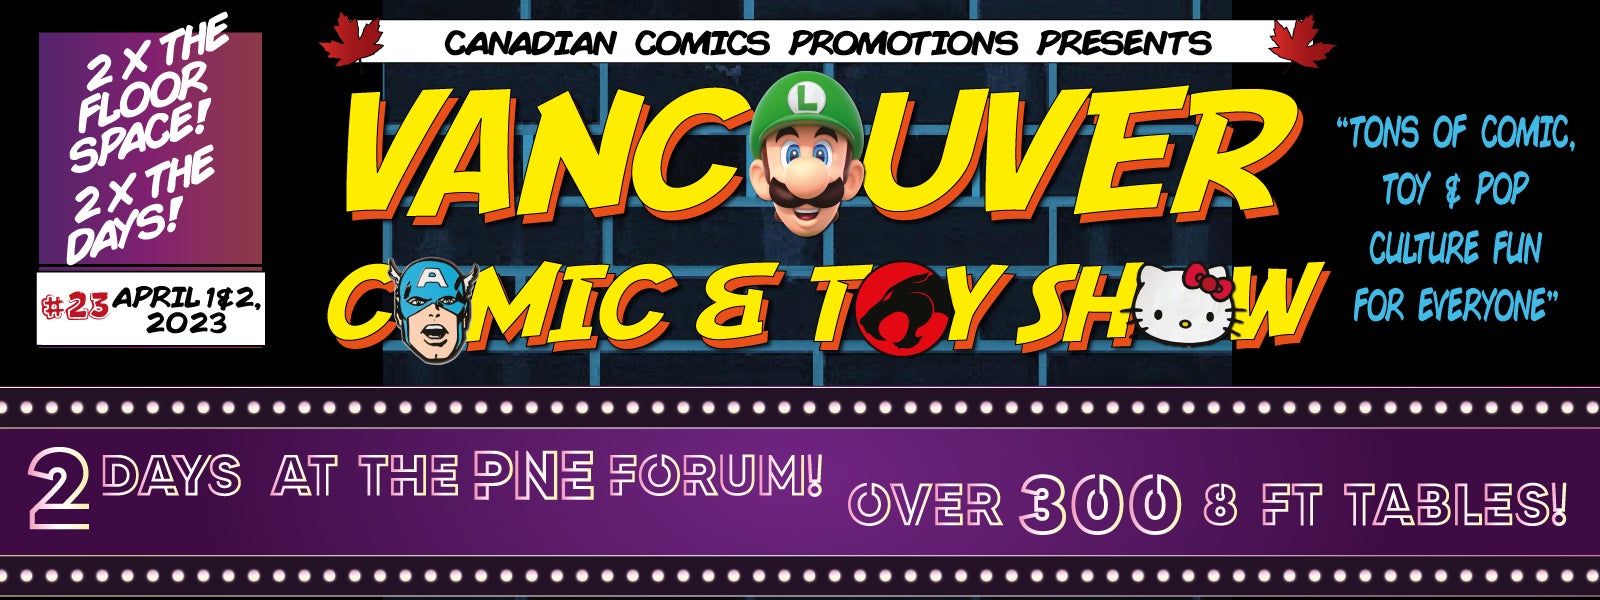 Vancouver Comic and Toy Show